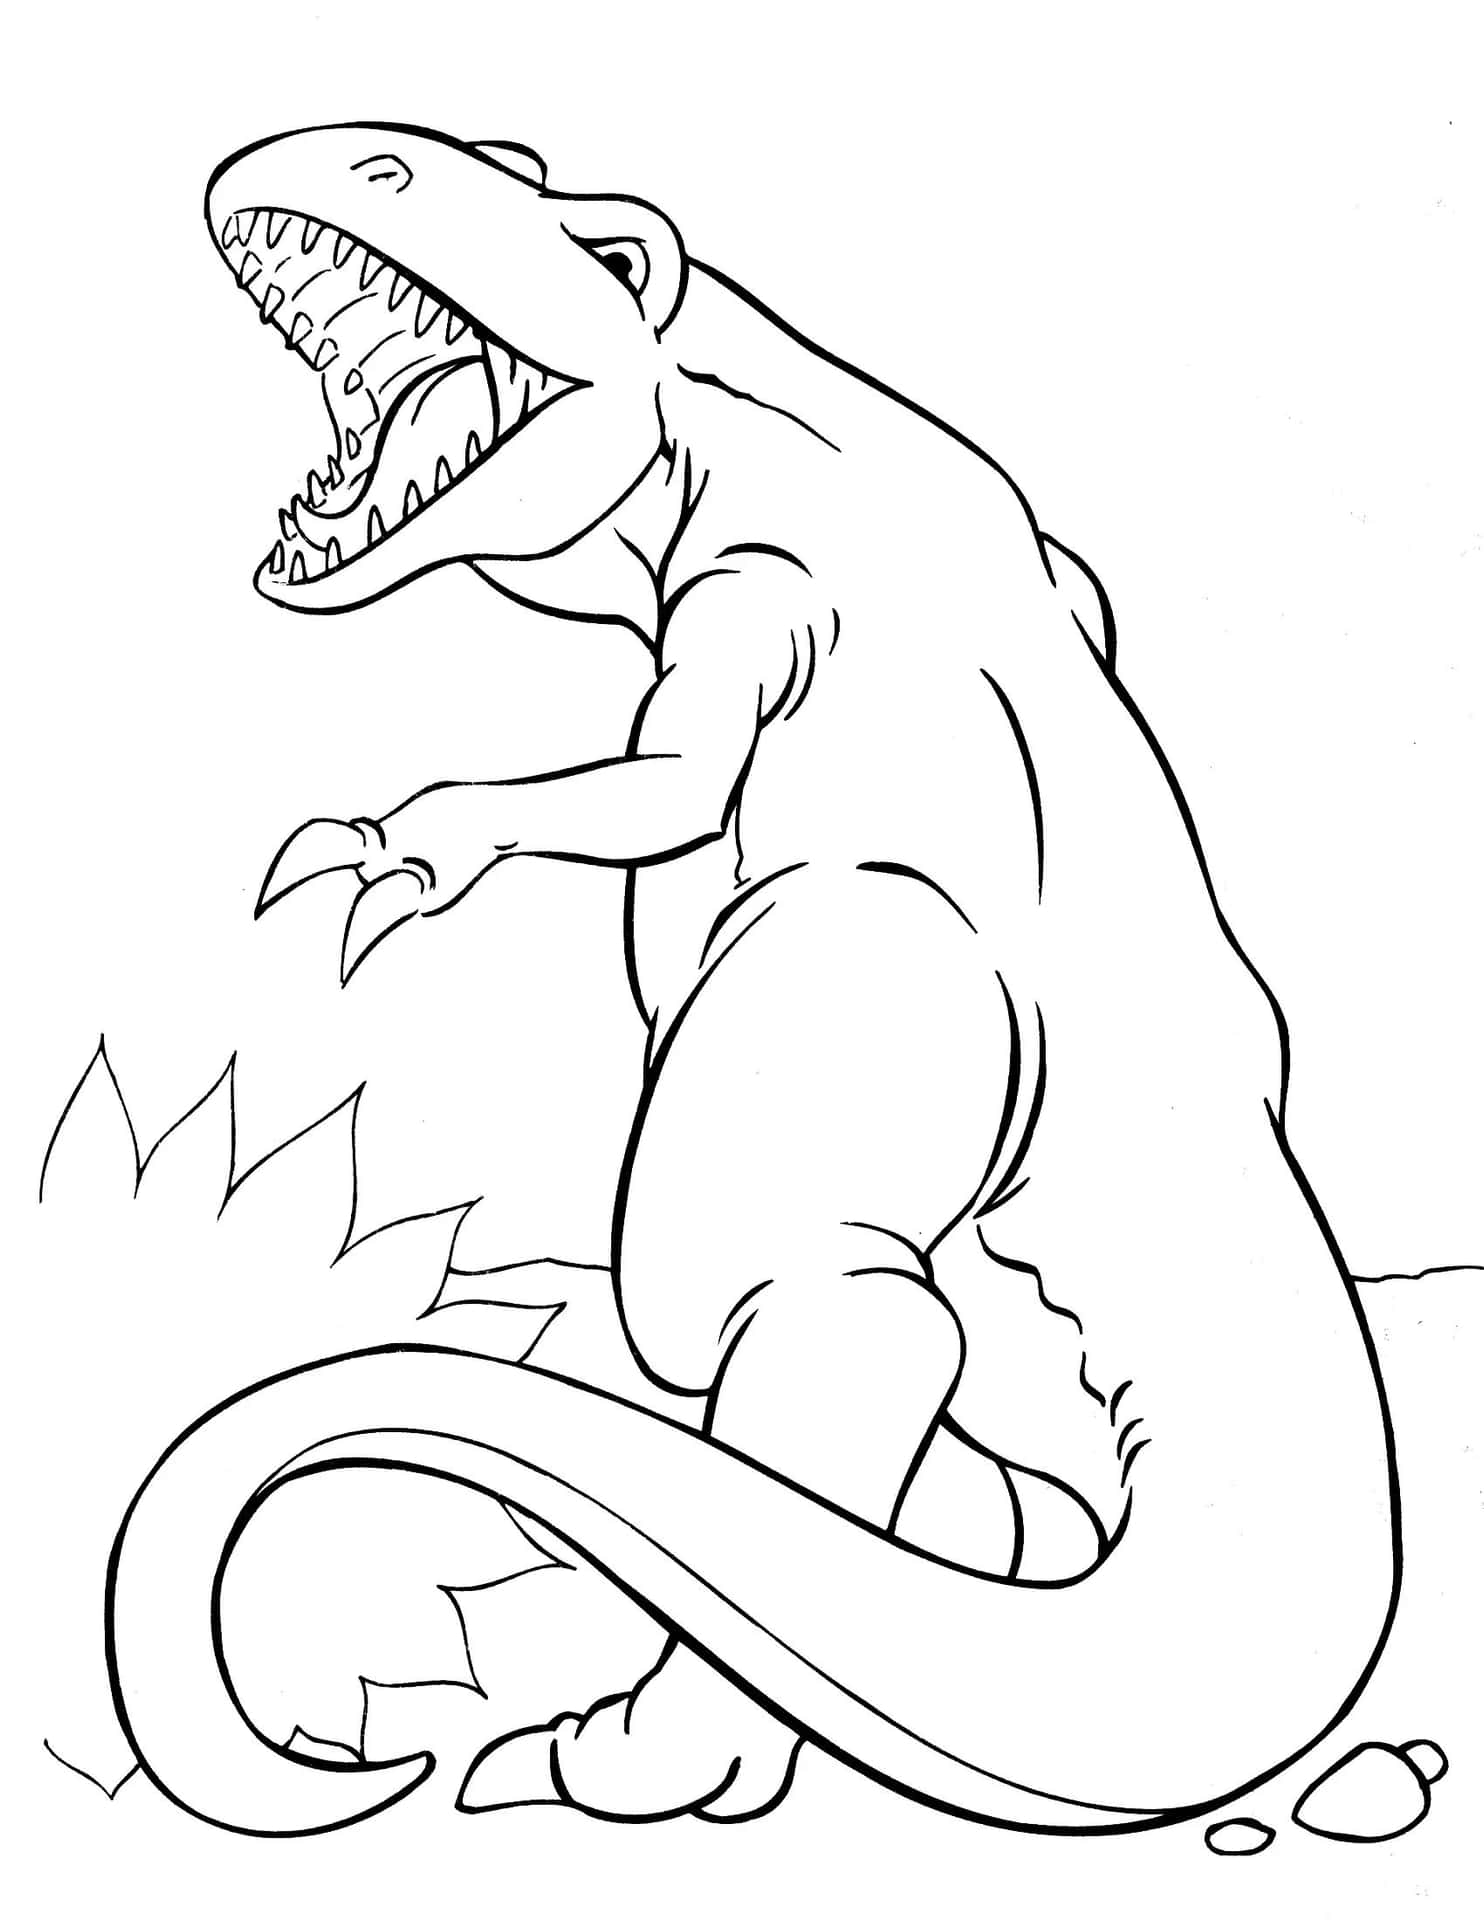 A T - Rex Coloring Page With A Mouth Open